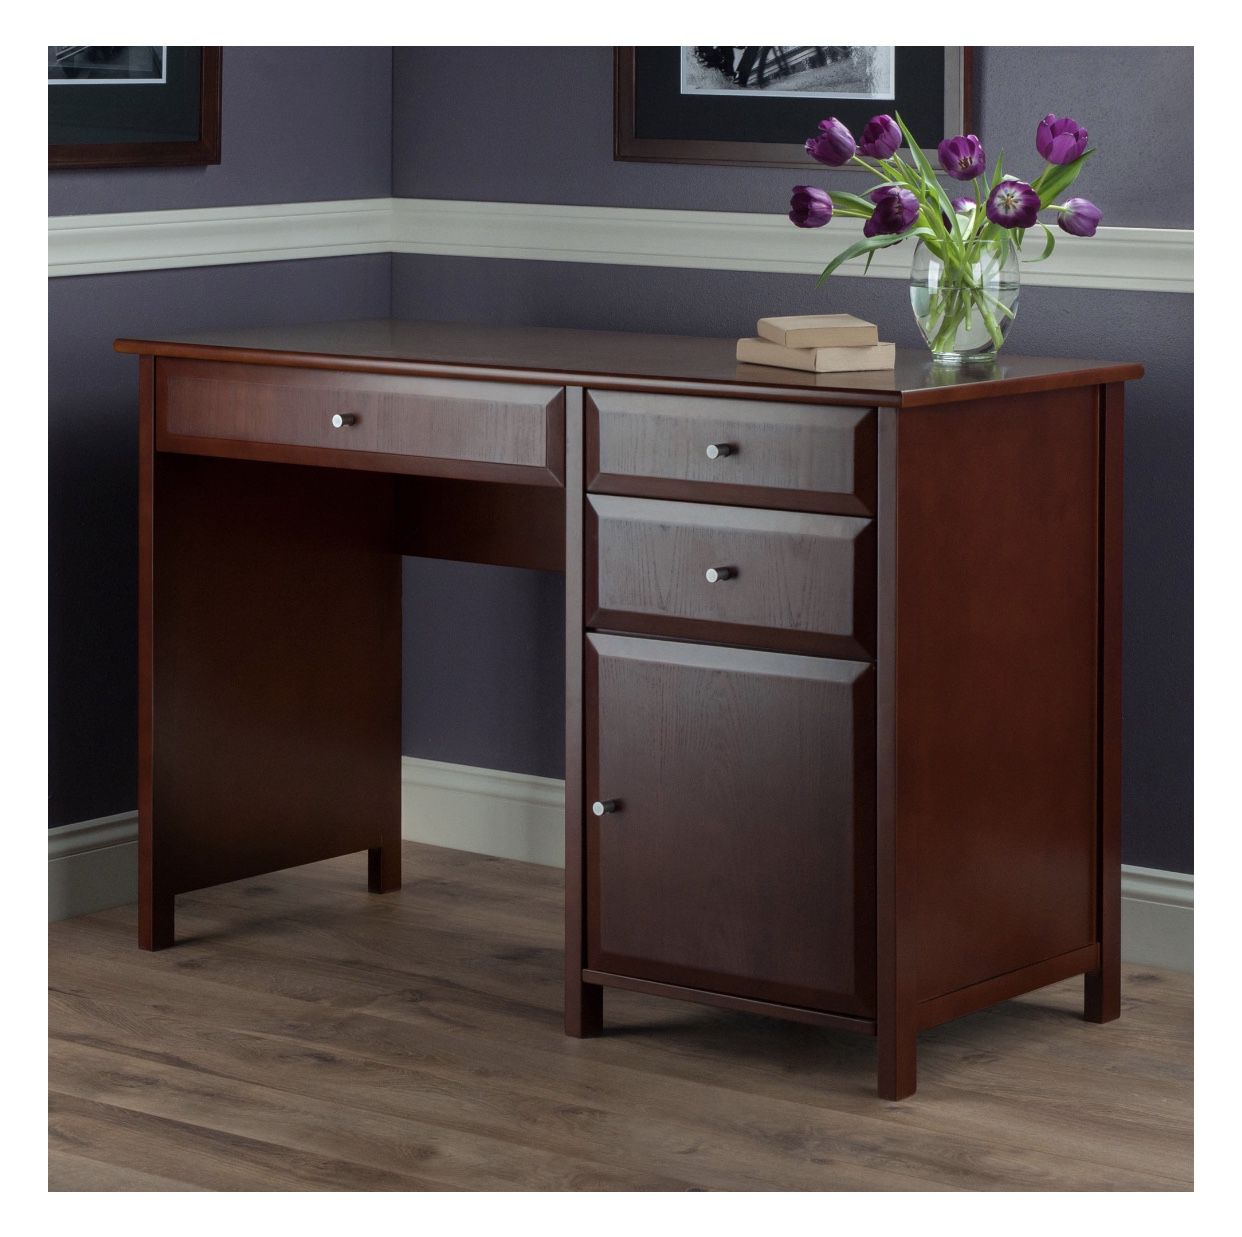 Winsome Wood Delta Home Office Writing Desk, Walnut Finish